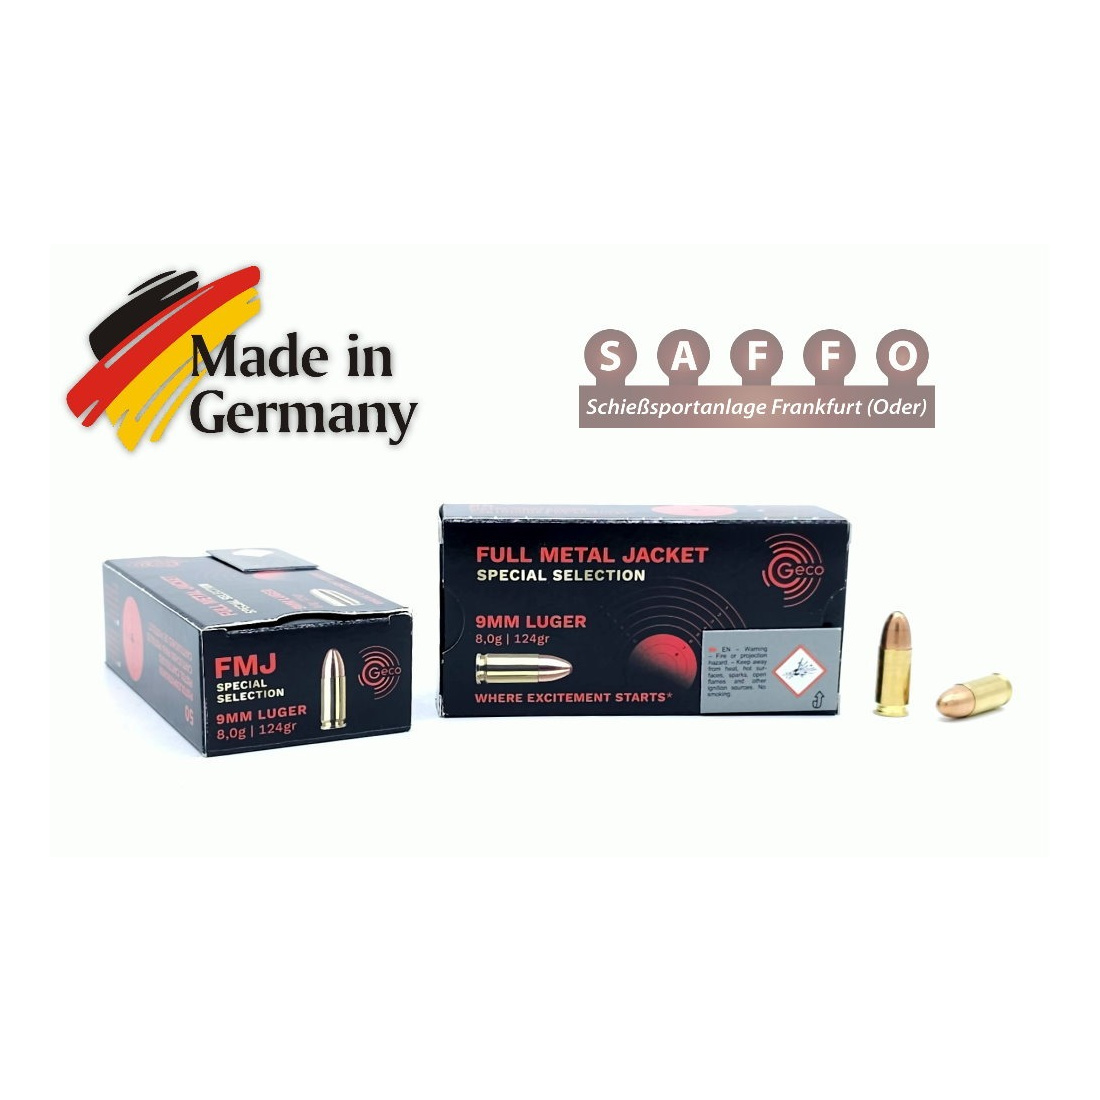 9mm Luger Geco Special Selection 8,0g/124 grs. FMJ Germany - 1000 Stück -